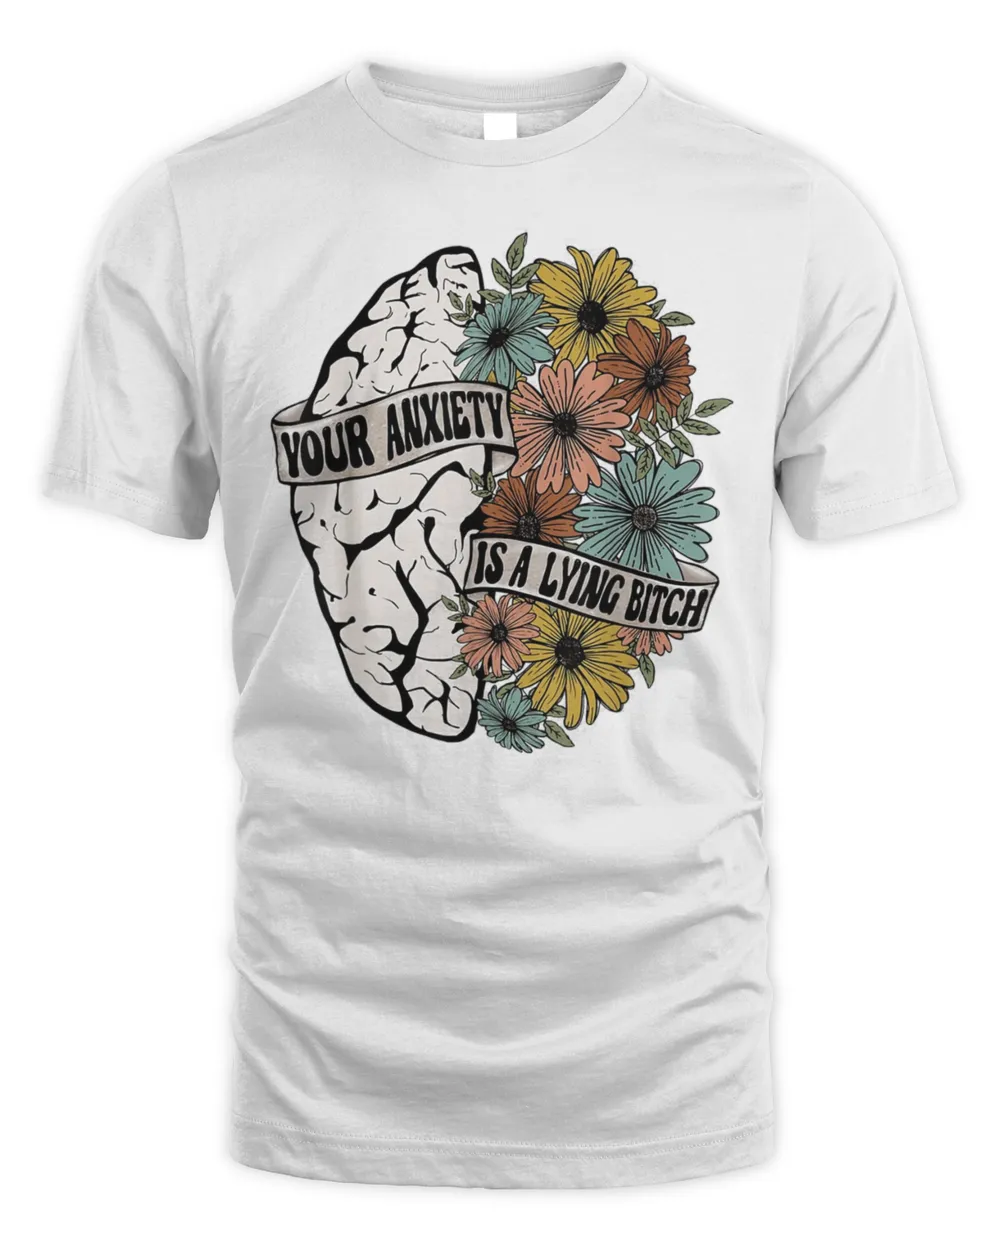 Your Anxiety Is A Lying Bitch Brain Flower Shirt